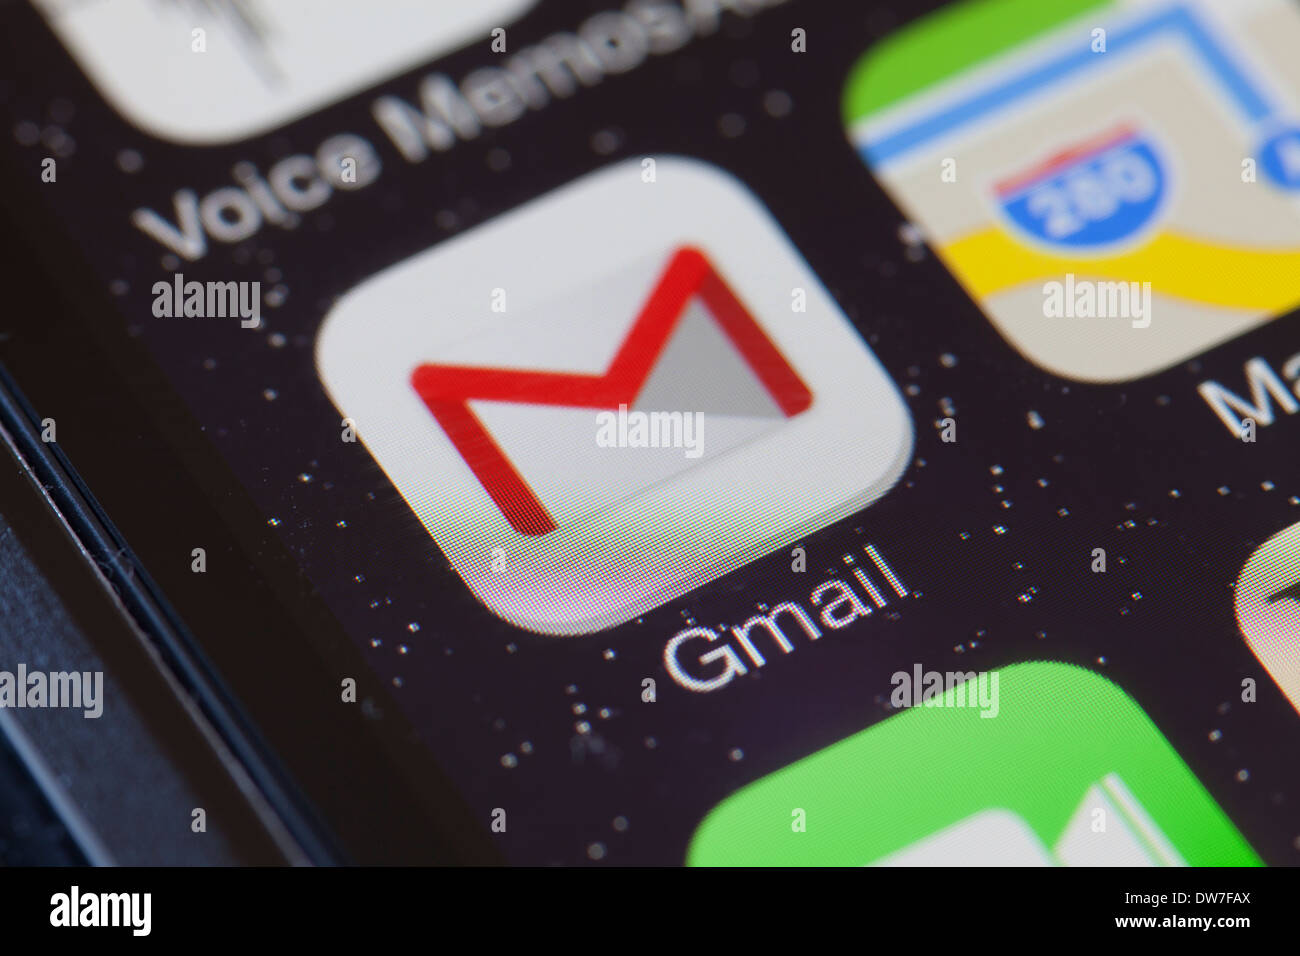 Gmail app icon on mobile phone. Stock Photo